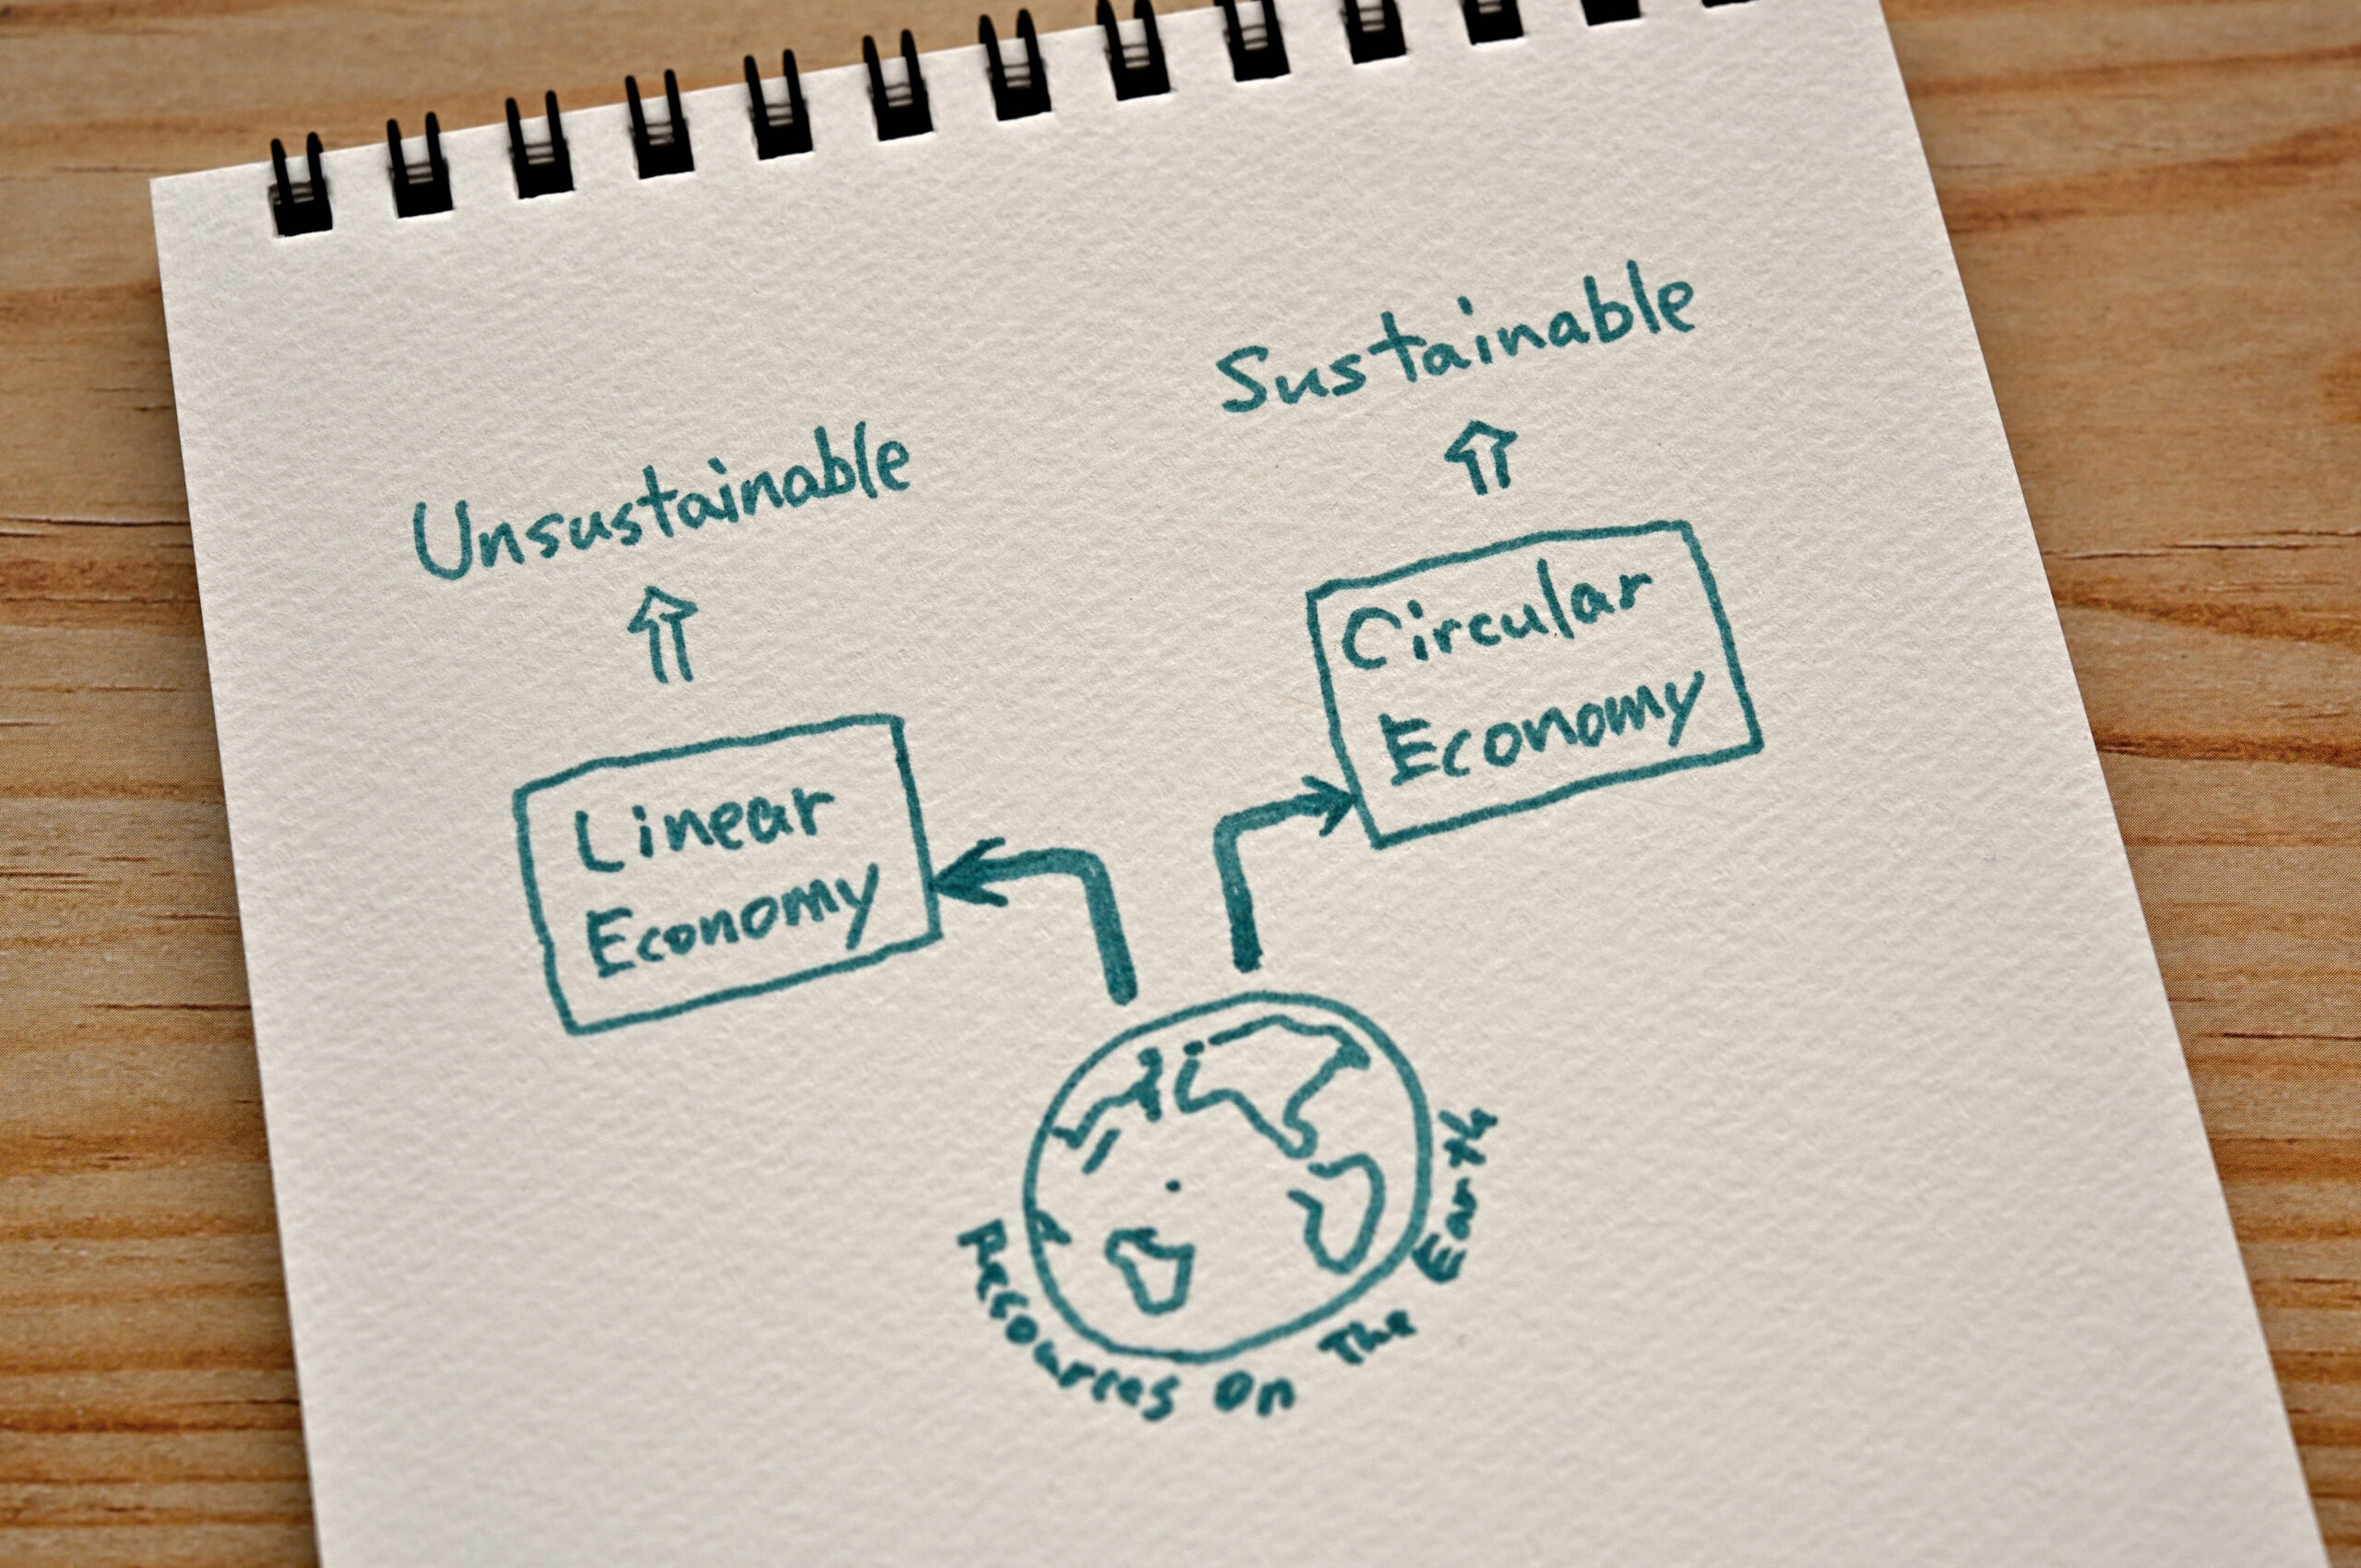 Circular,Economy,Or,Linear,Economy,Written,On,Notebook.